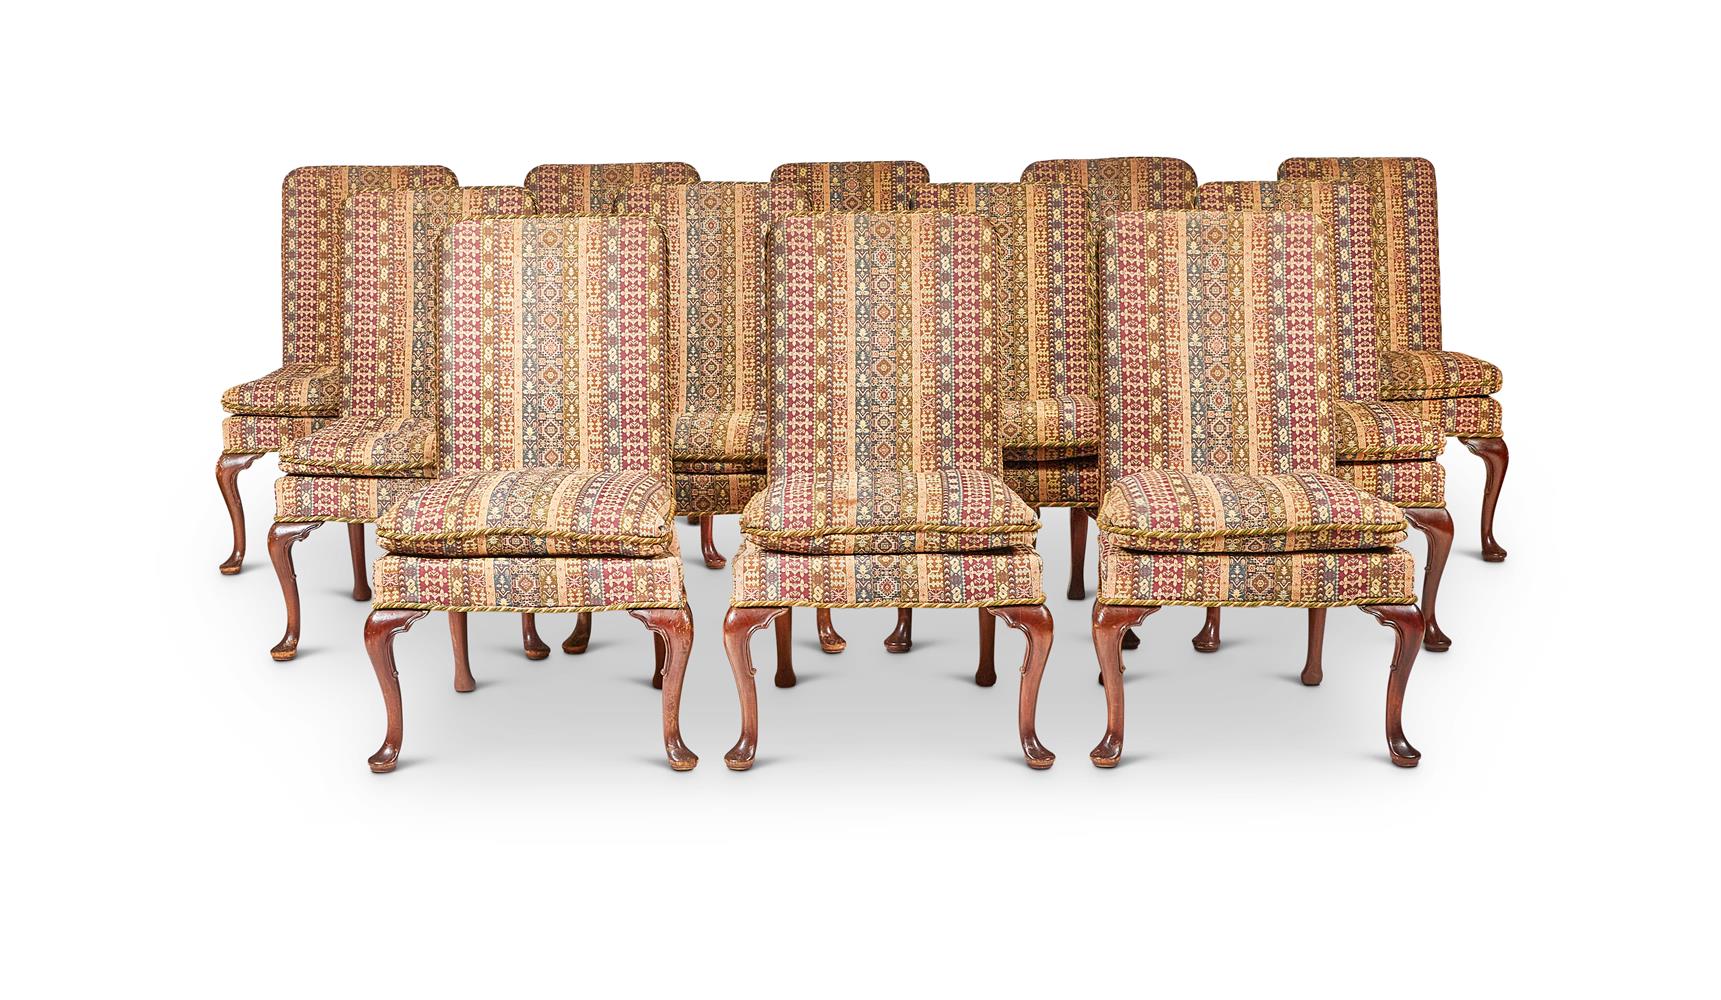 Y A SET OF TWENTY-TWO GEORGE II STYLE MAHOGANY FRAMED PANEL BACK DINING CHAIRS - Image 2 of 5